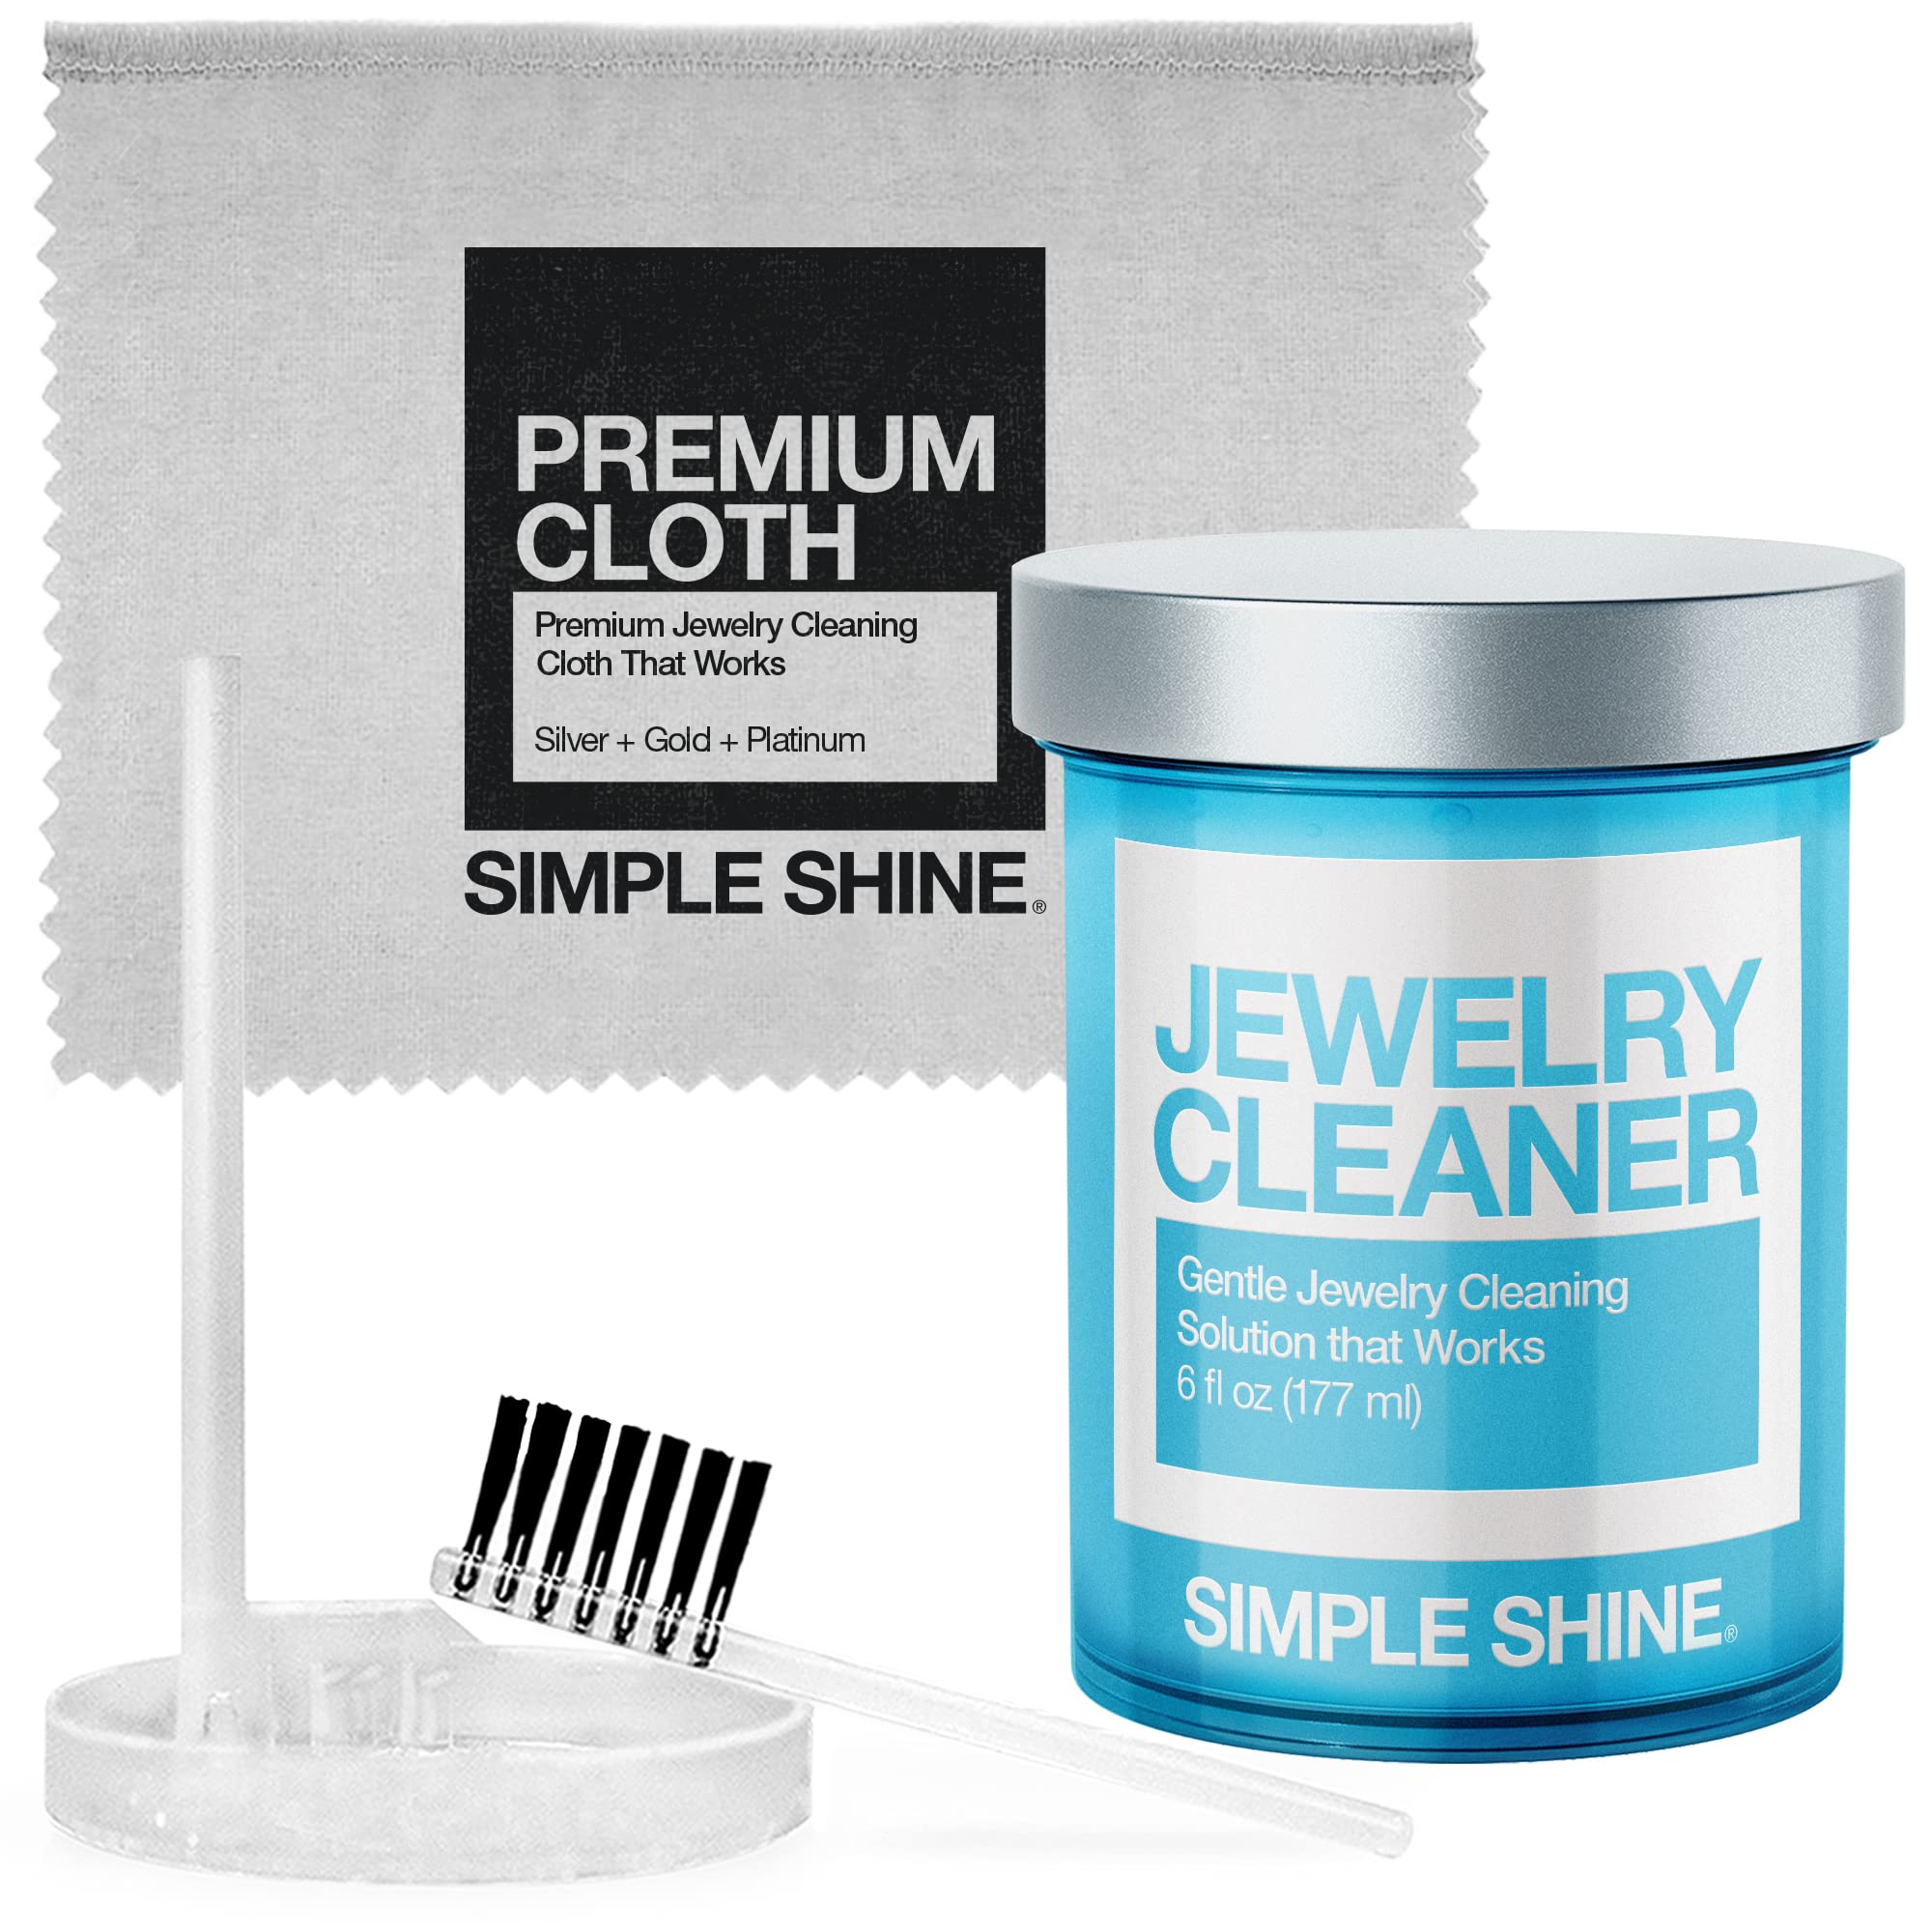 Book Cover Complete Jewelry Cleaning Kit Polishing w/Cloth, Brush and Jewelry Cleaner Solution for all Jewelry. Gold, Silver, Diamond Ring Cleaner, Earring, Fine & Fashion Cleaning Made in the USA Gentle Jewelry Kit